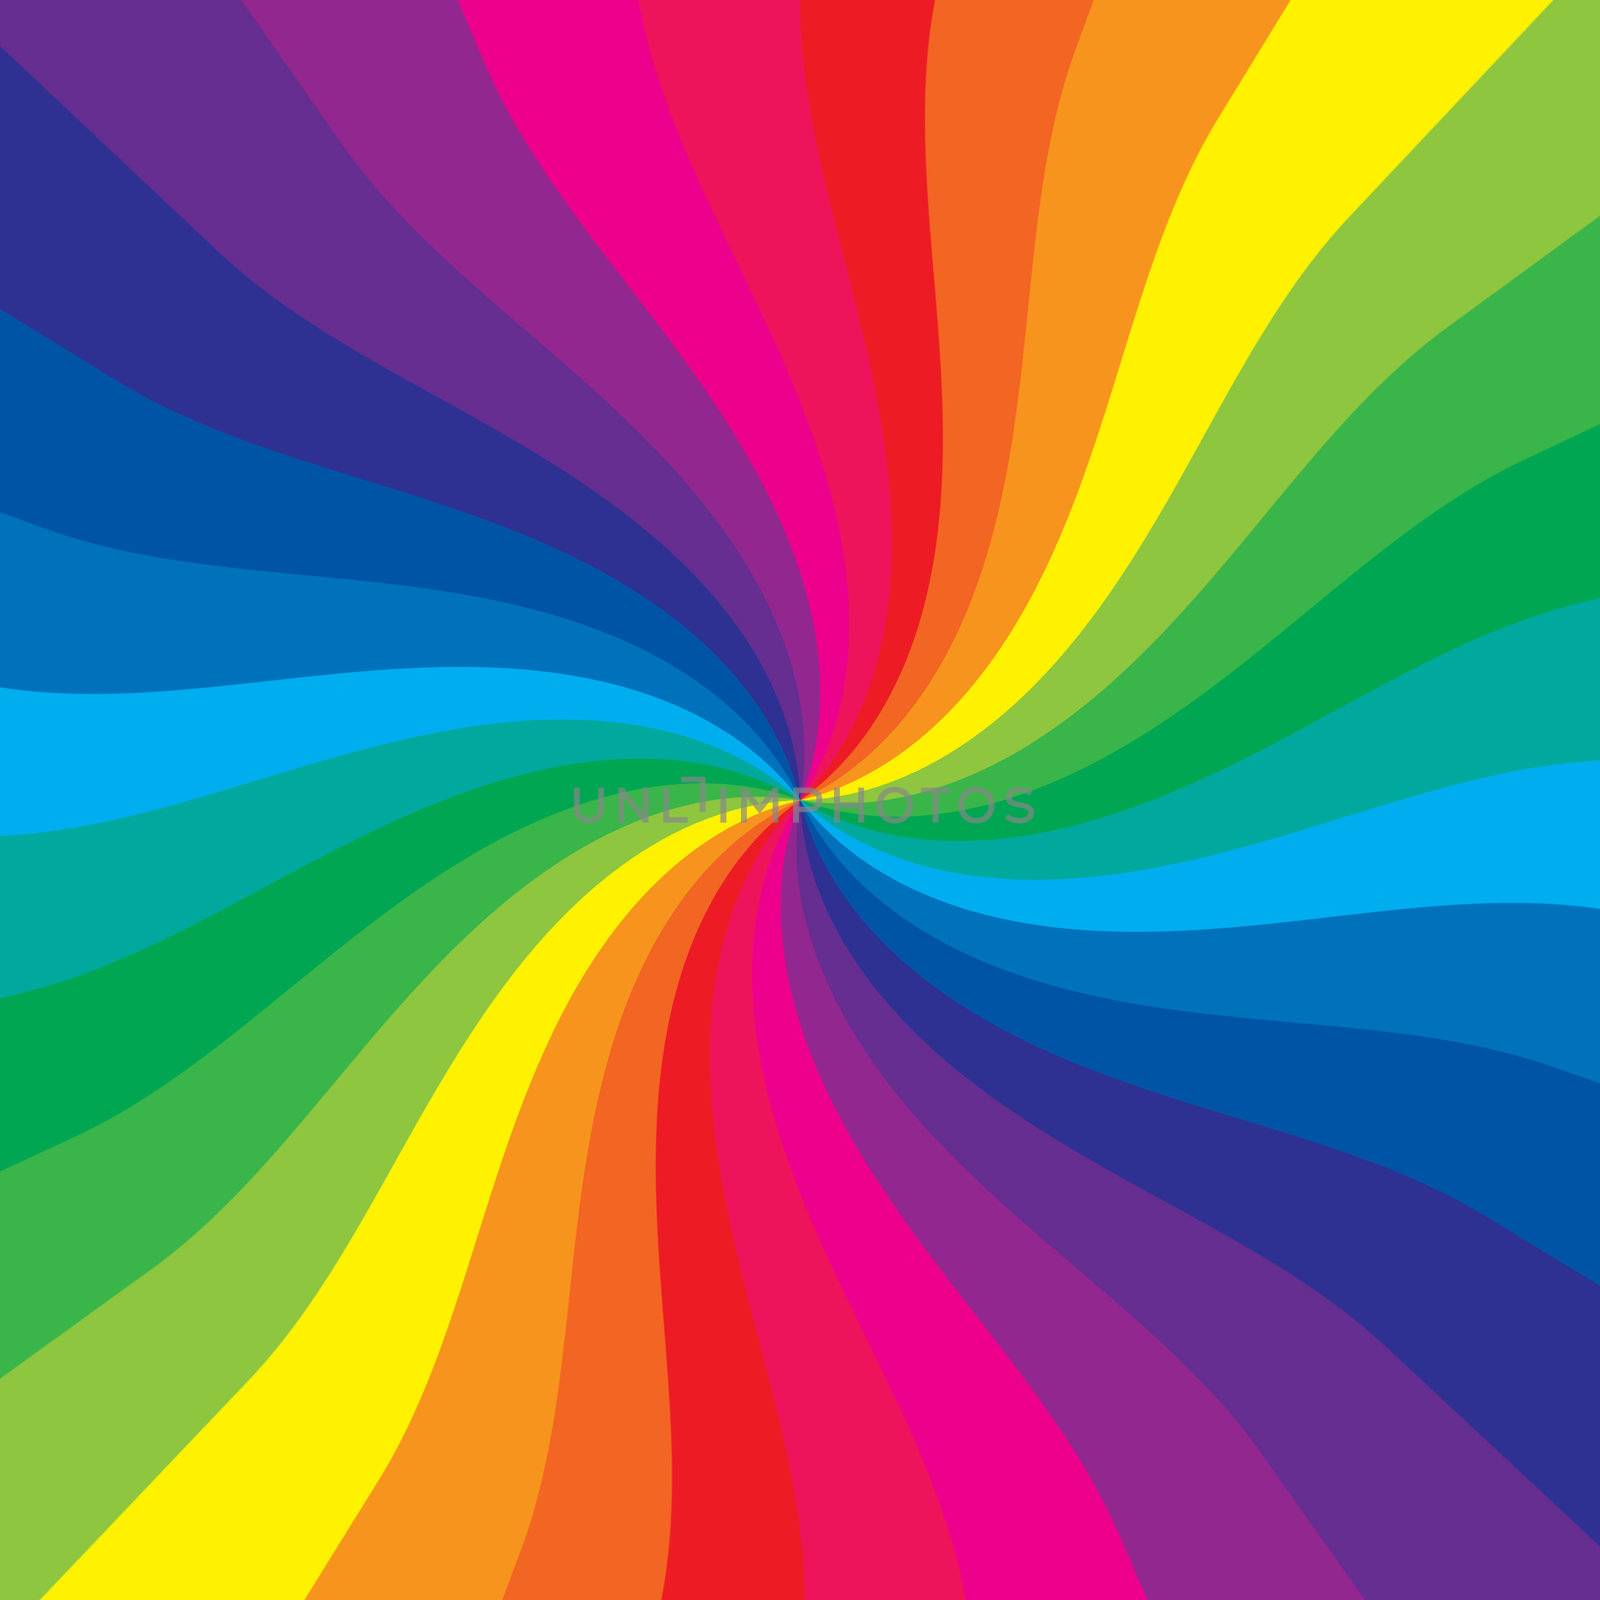 Rainbow burst makes a very colorful background 